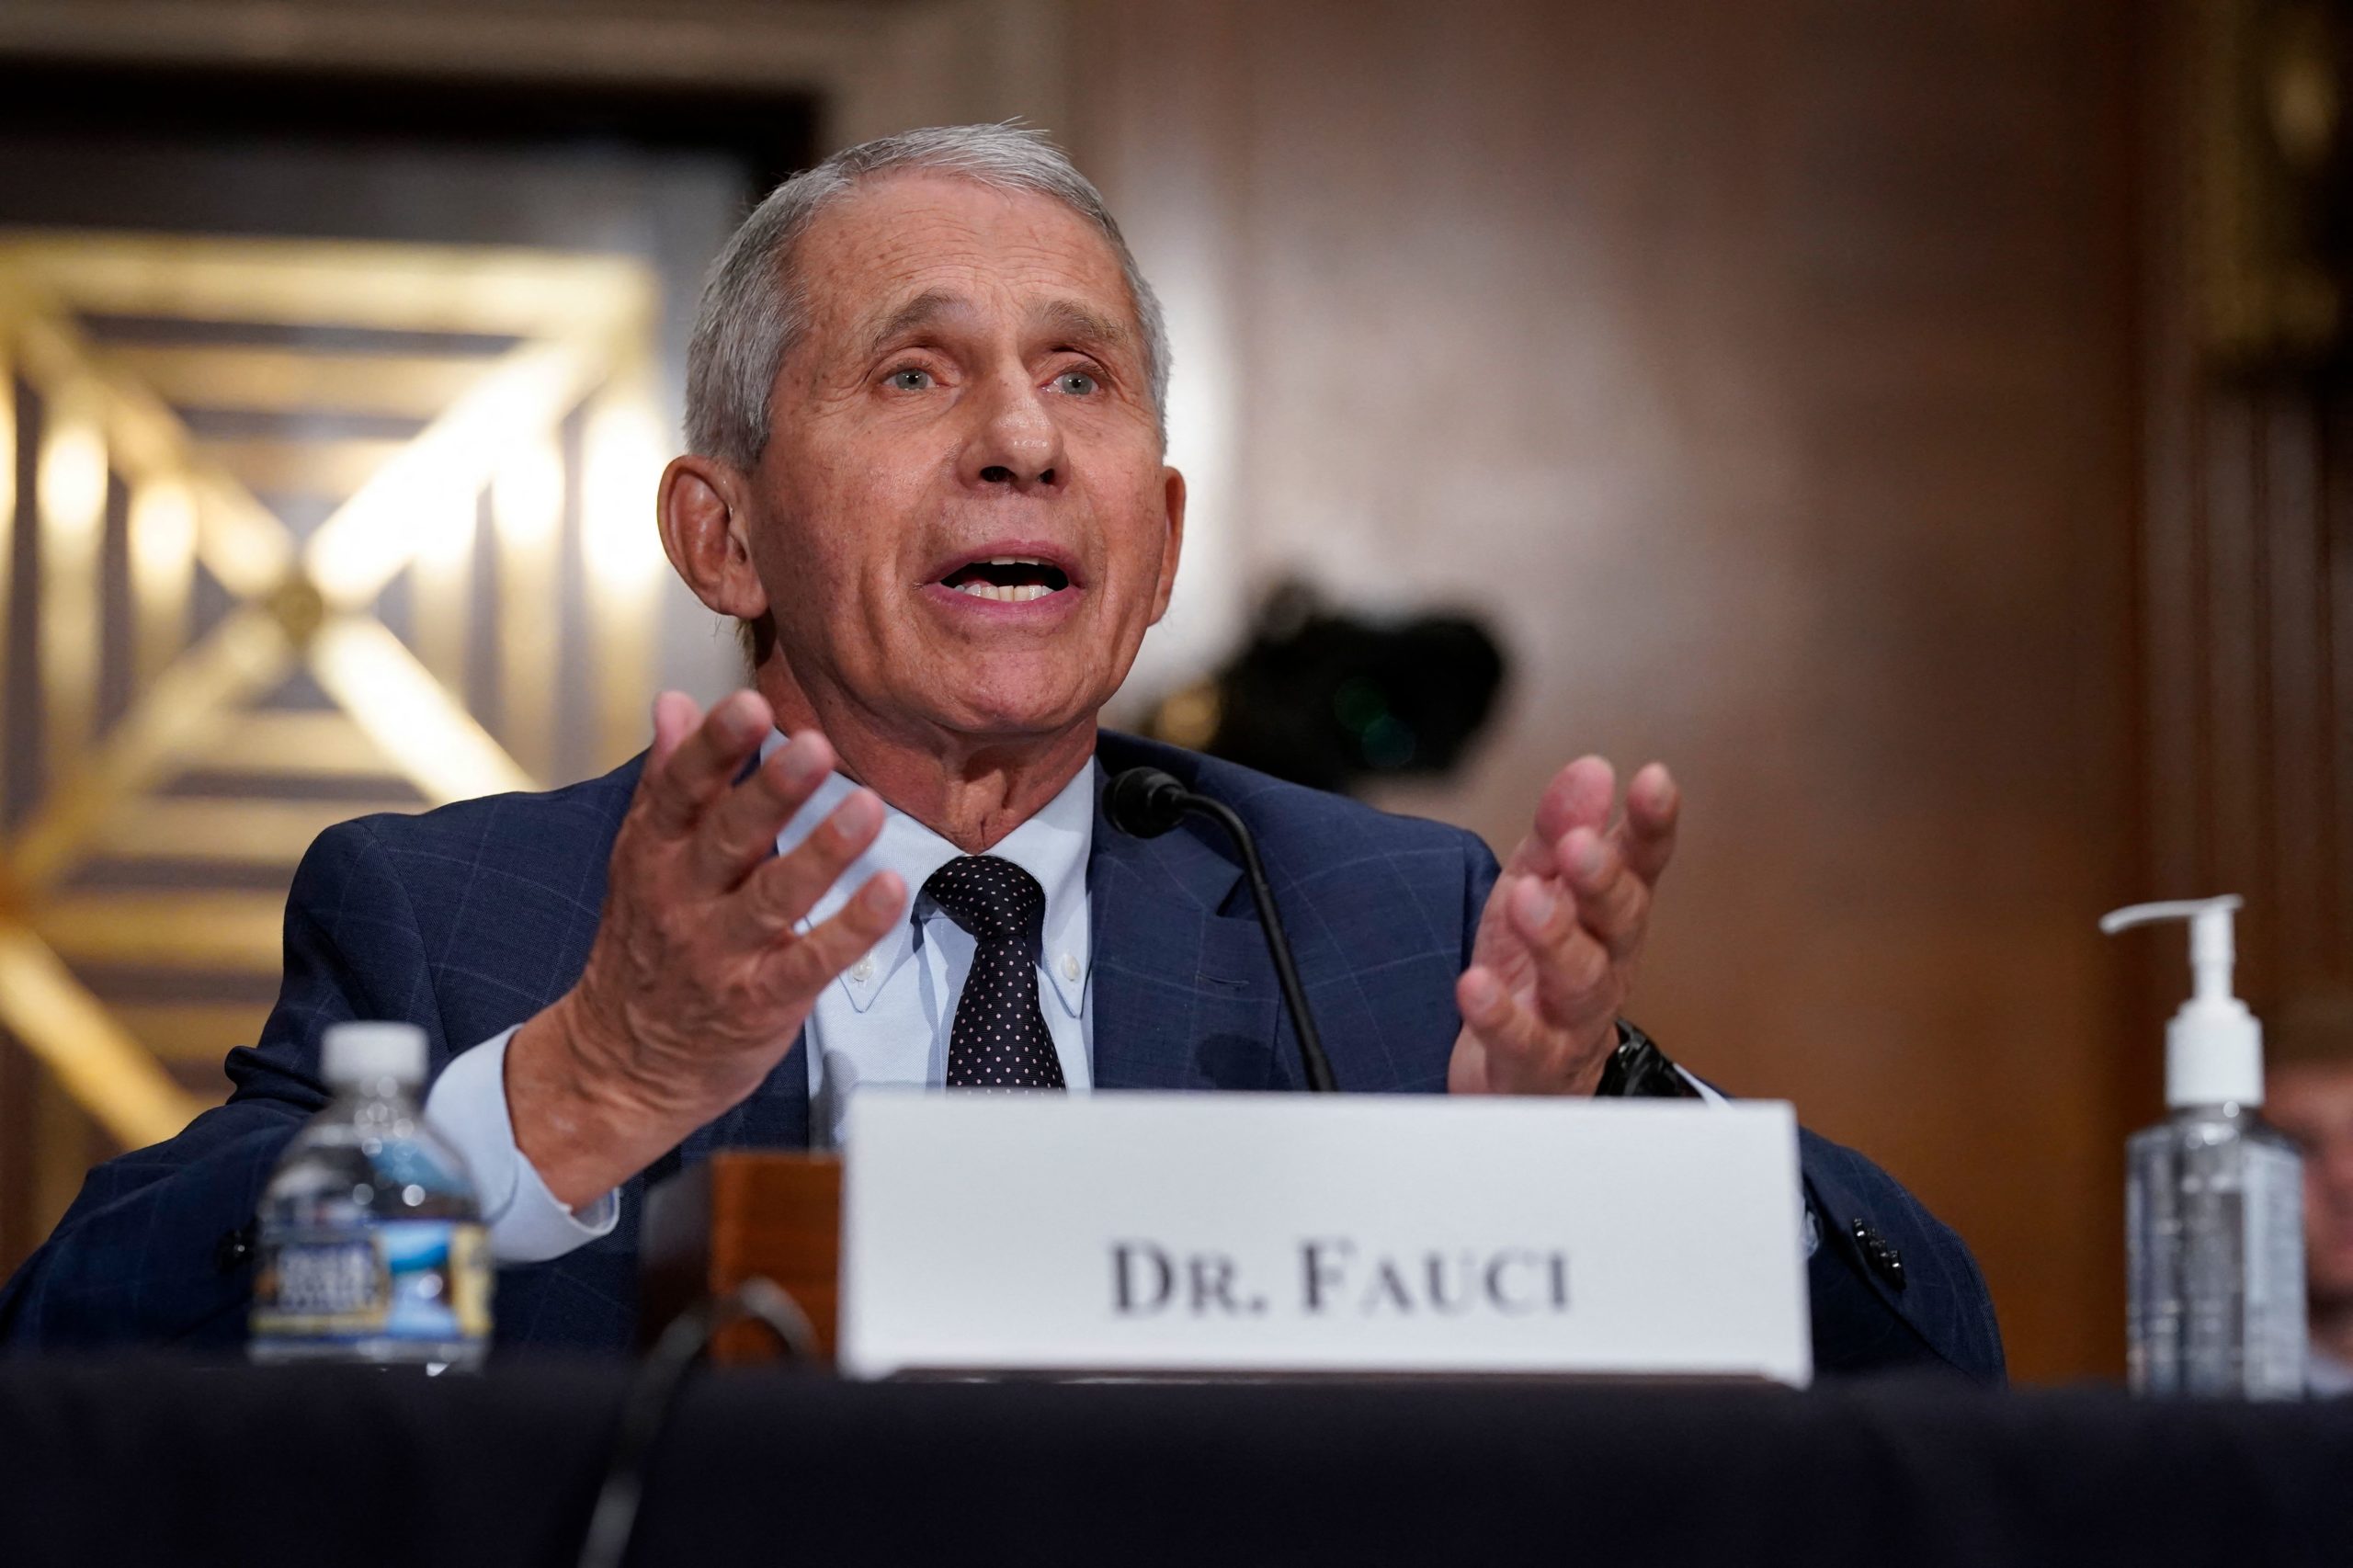 Dr. Anthony Fauci, director of the National Institute of Allergy and Infectious Diseases, responds to questions by Senator Rand Paul during the Senate Health, Education, Labor, and Pensions Committee hearing on Capitol Hill in Washington, DC on July 20, 2021. (Photo by J. SCOTT APPLEWHITE/POOL/AFP via Getty Images)